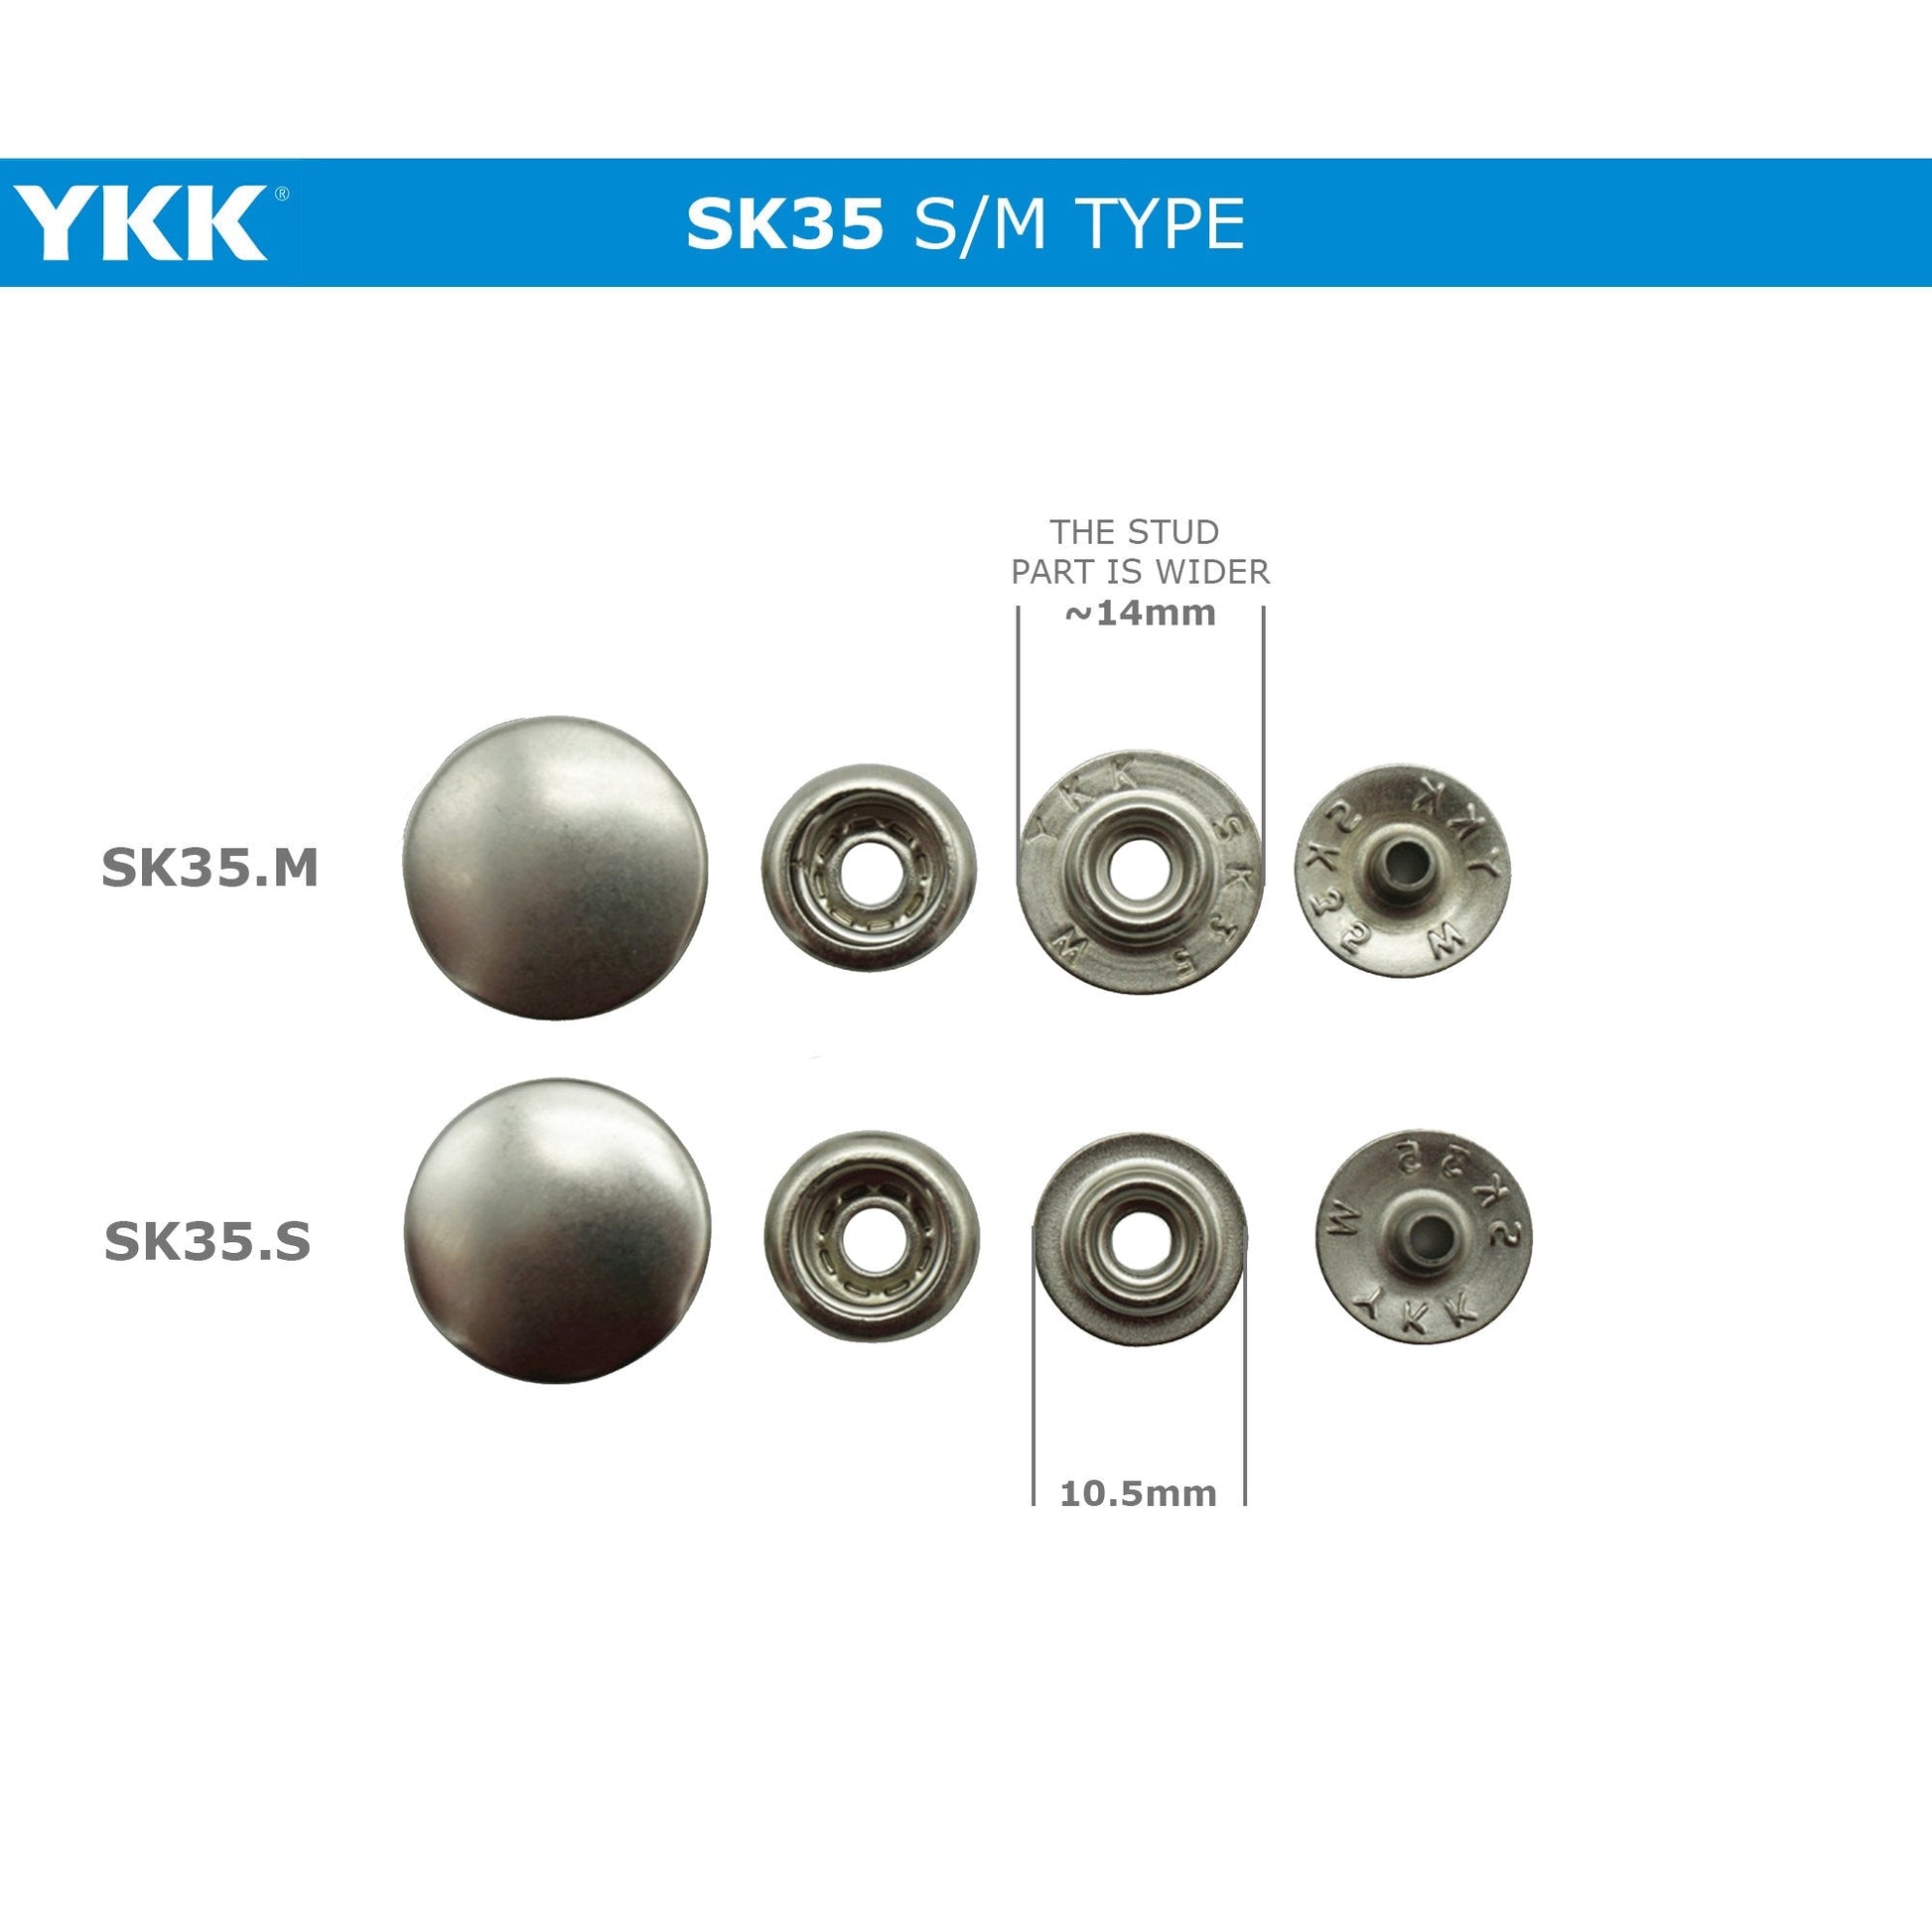 YKK SK35 Four Parts Ring-spring Button, Snap Button, Brass Button, Snaps, Metal Snap Snap ButtonsYKK